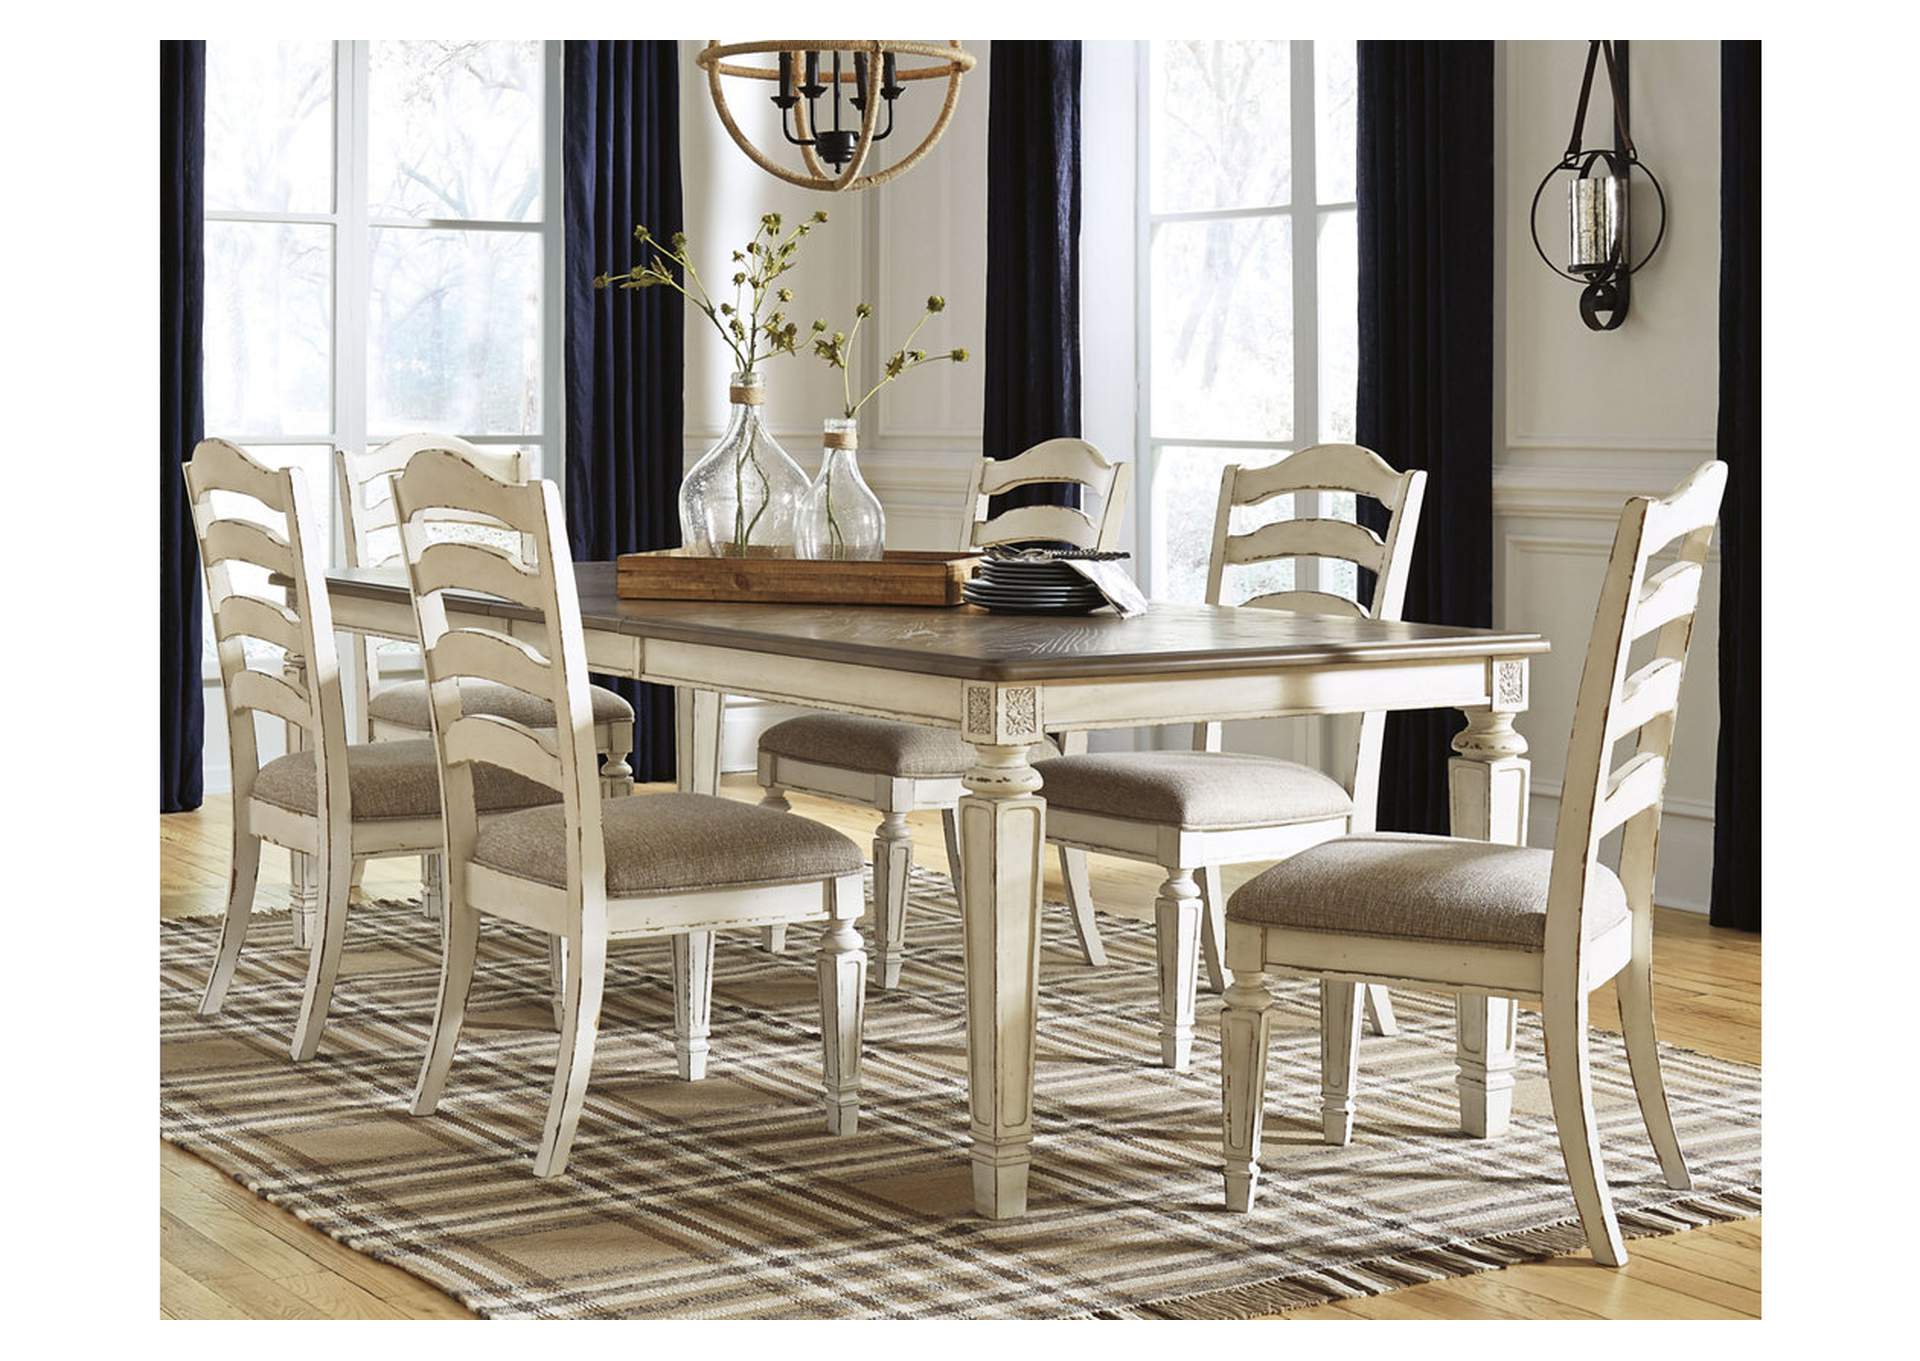 Realyn Dining Table and 6 Chairs,Signature Design By Ashley